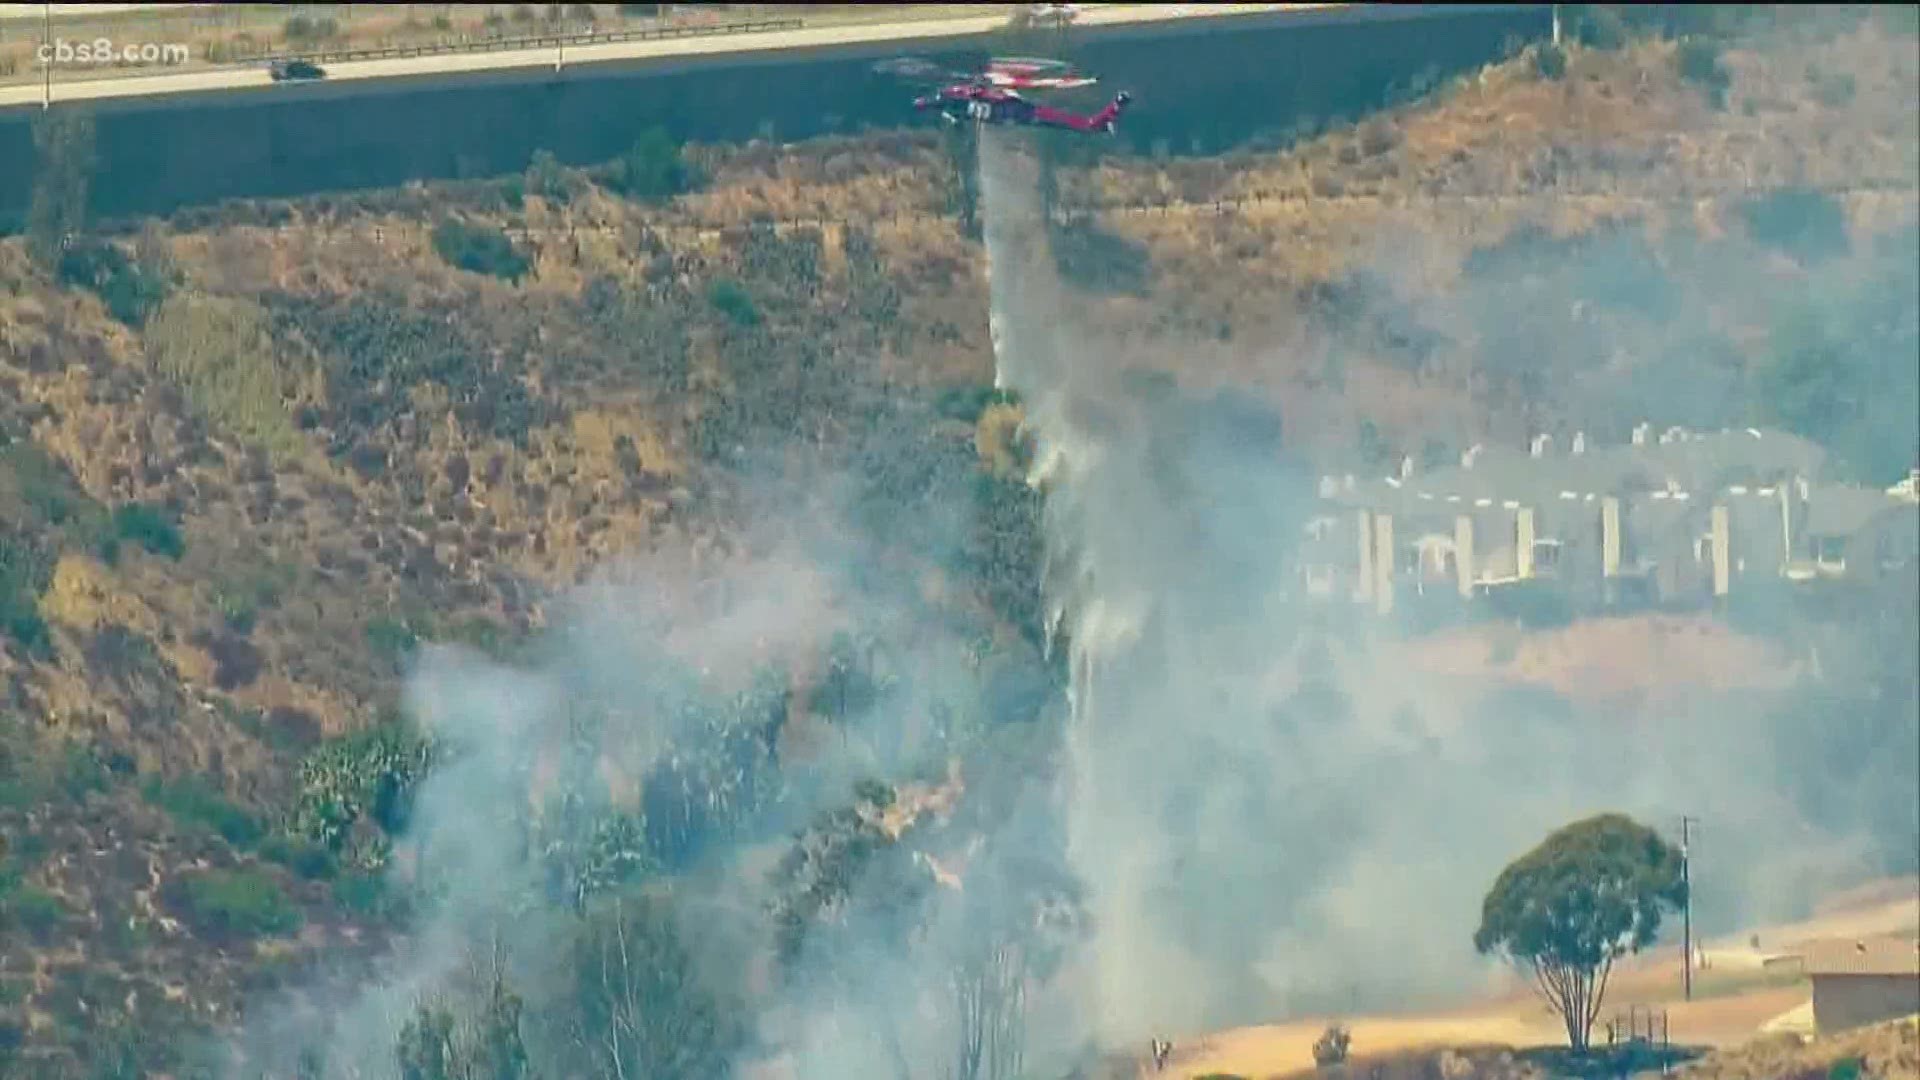 Cal Fire said the goal is to keep wildfires from spreading.